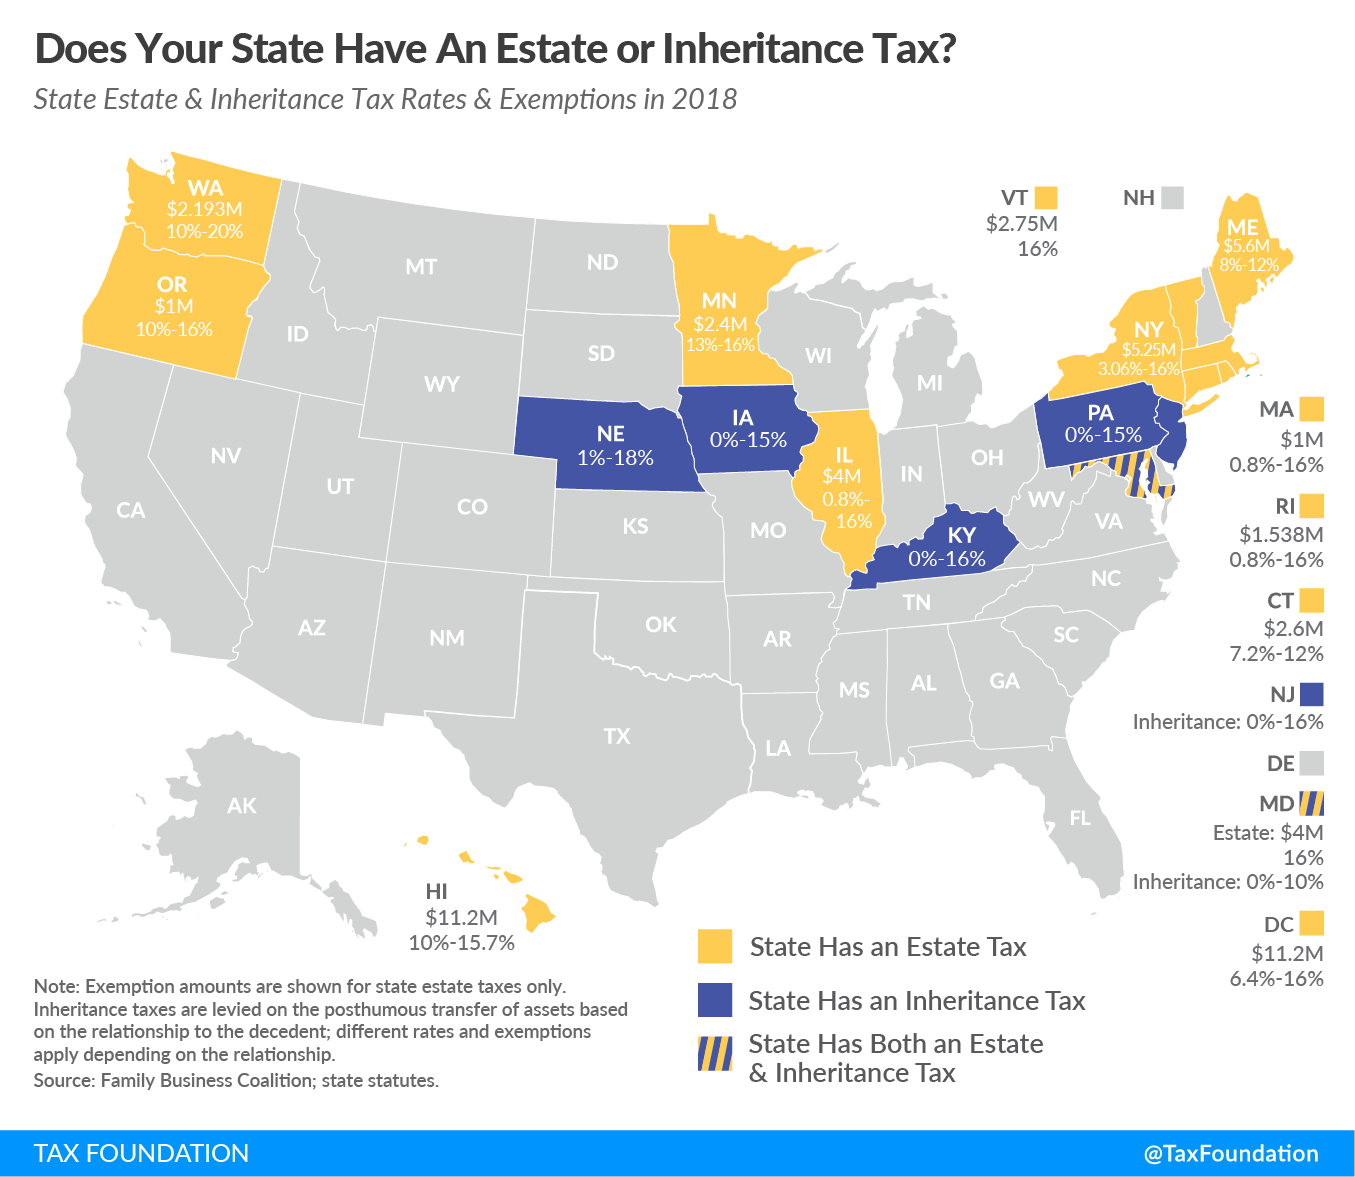 Does California Have An Inheritance Tax